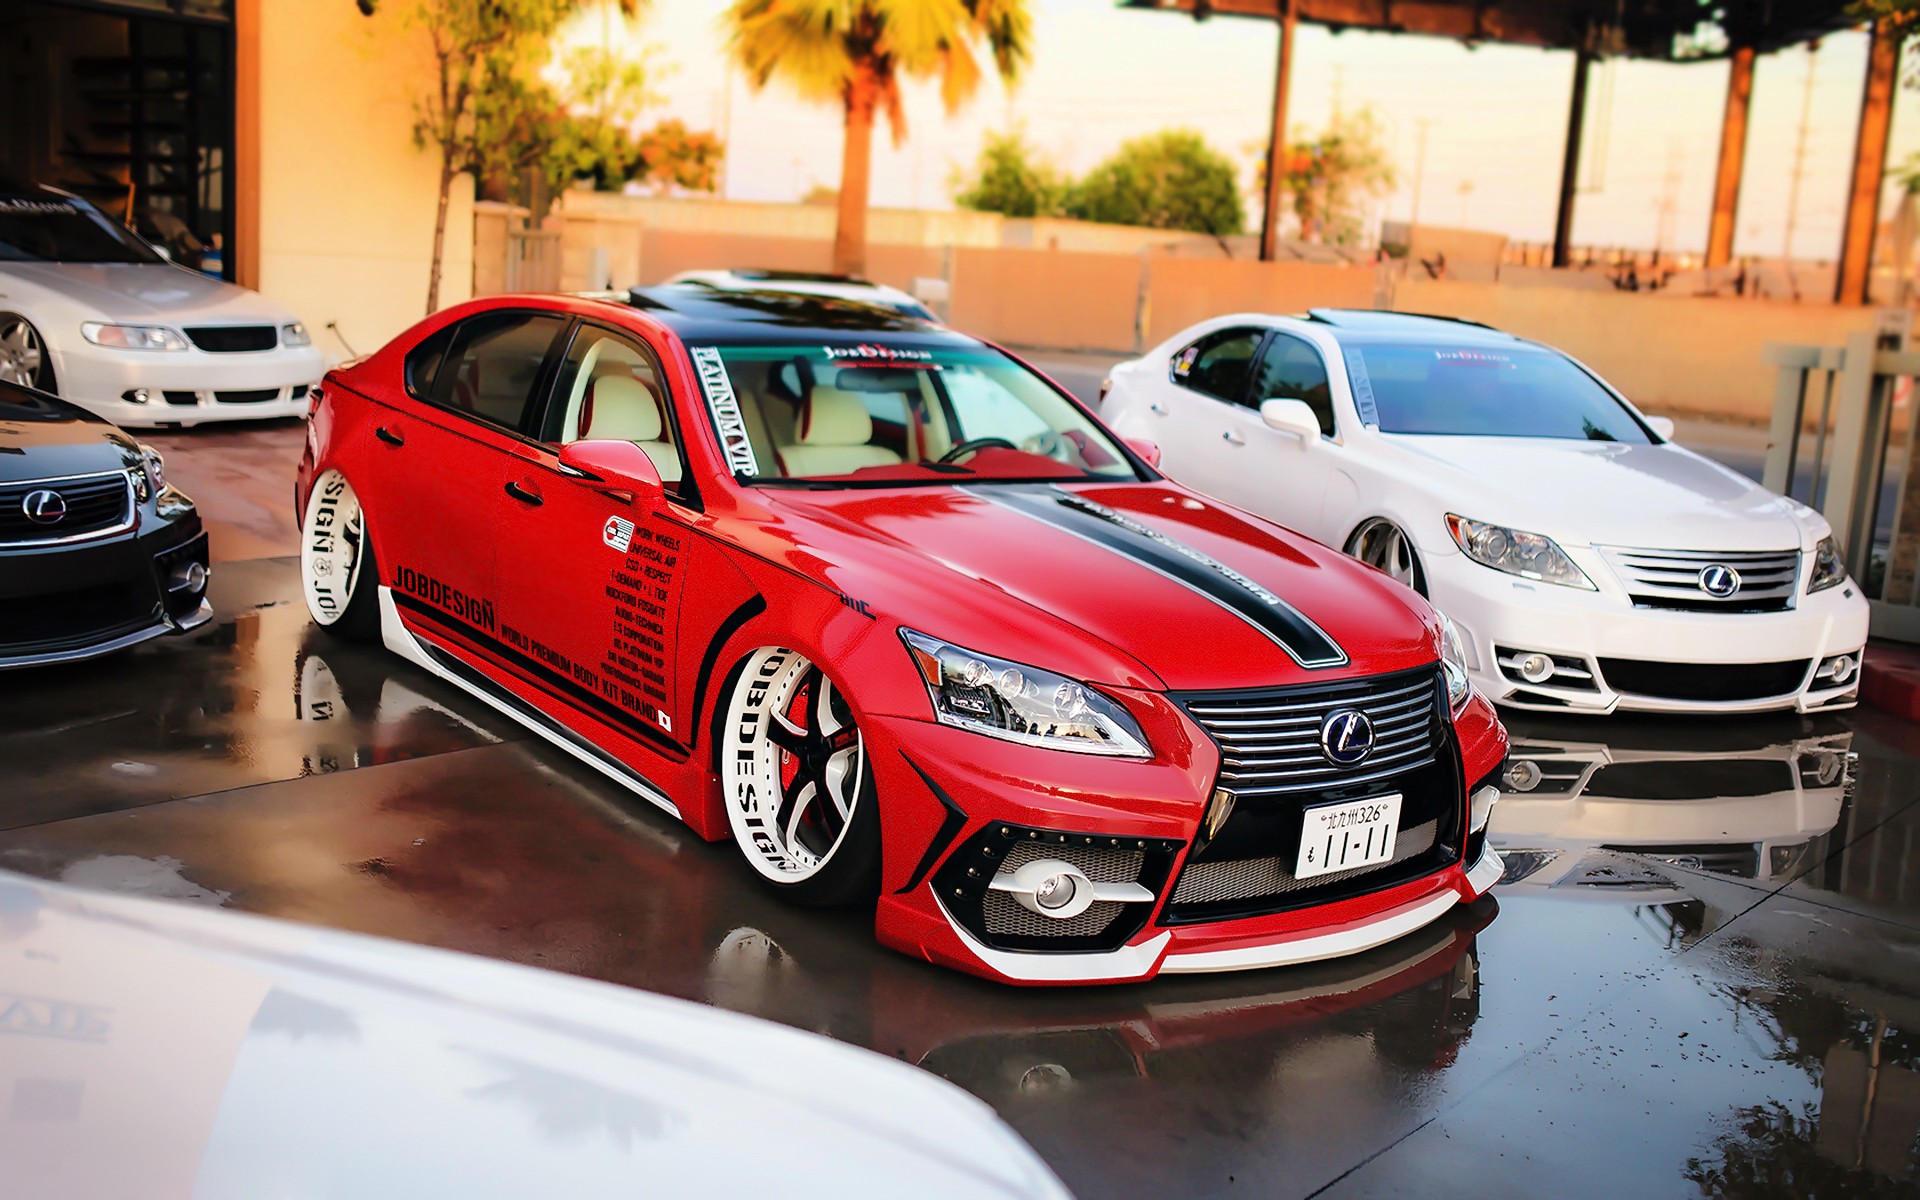 General 1920x1200 car vehicle white cars red cars Lexus Japanese cars stanced